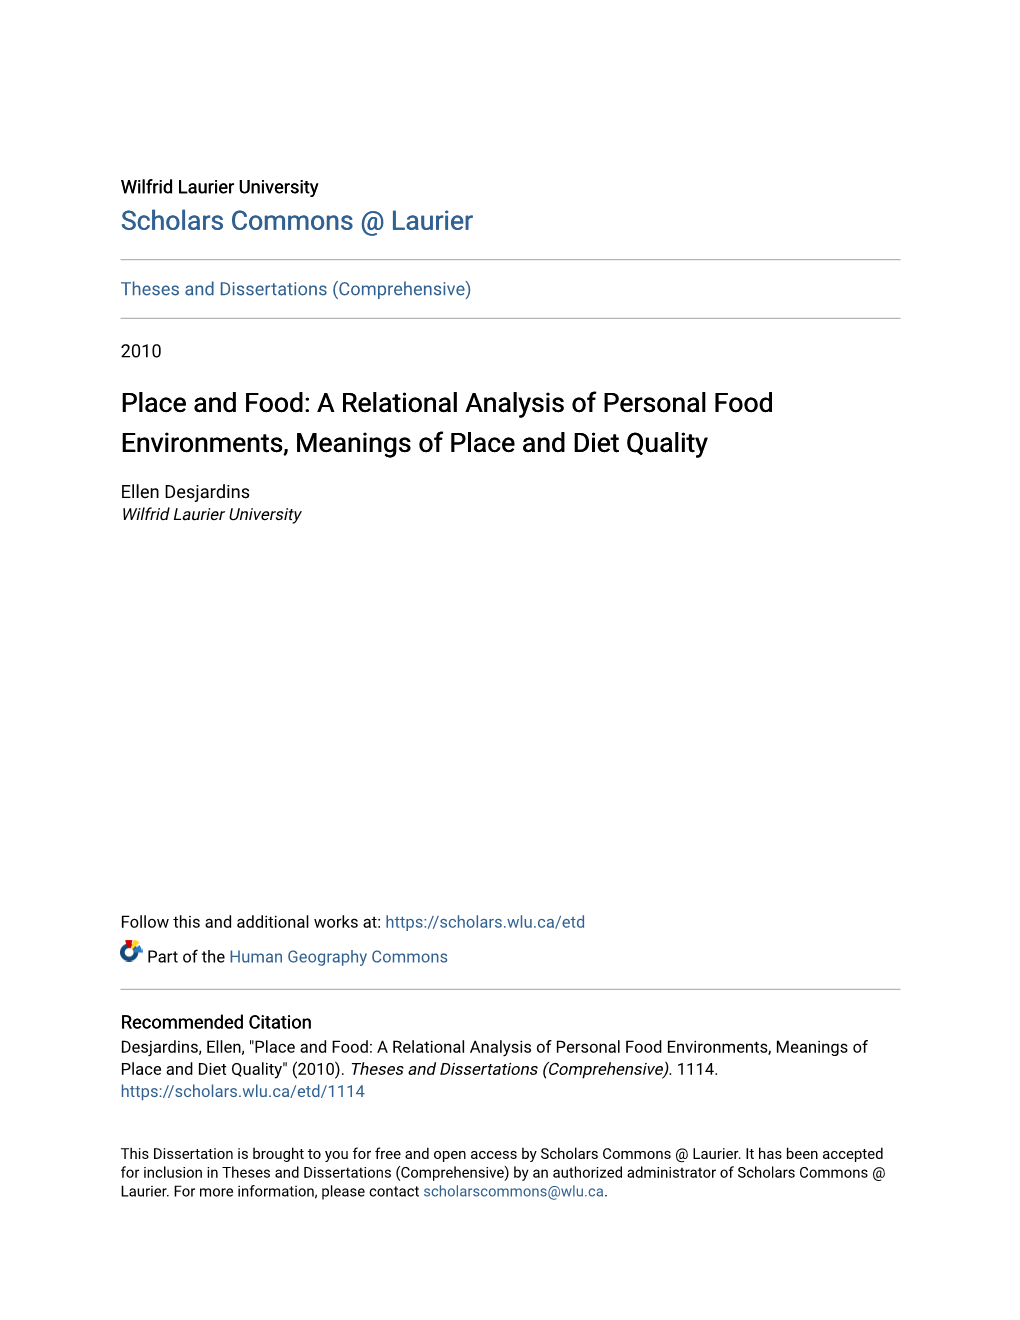 Place and Food: a Relational Analysis of Personal Food Environments, Meanings of Place and Diet Quality